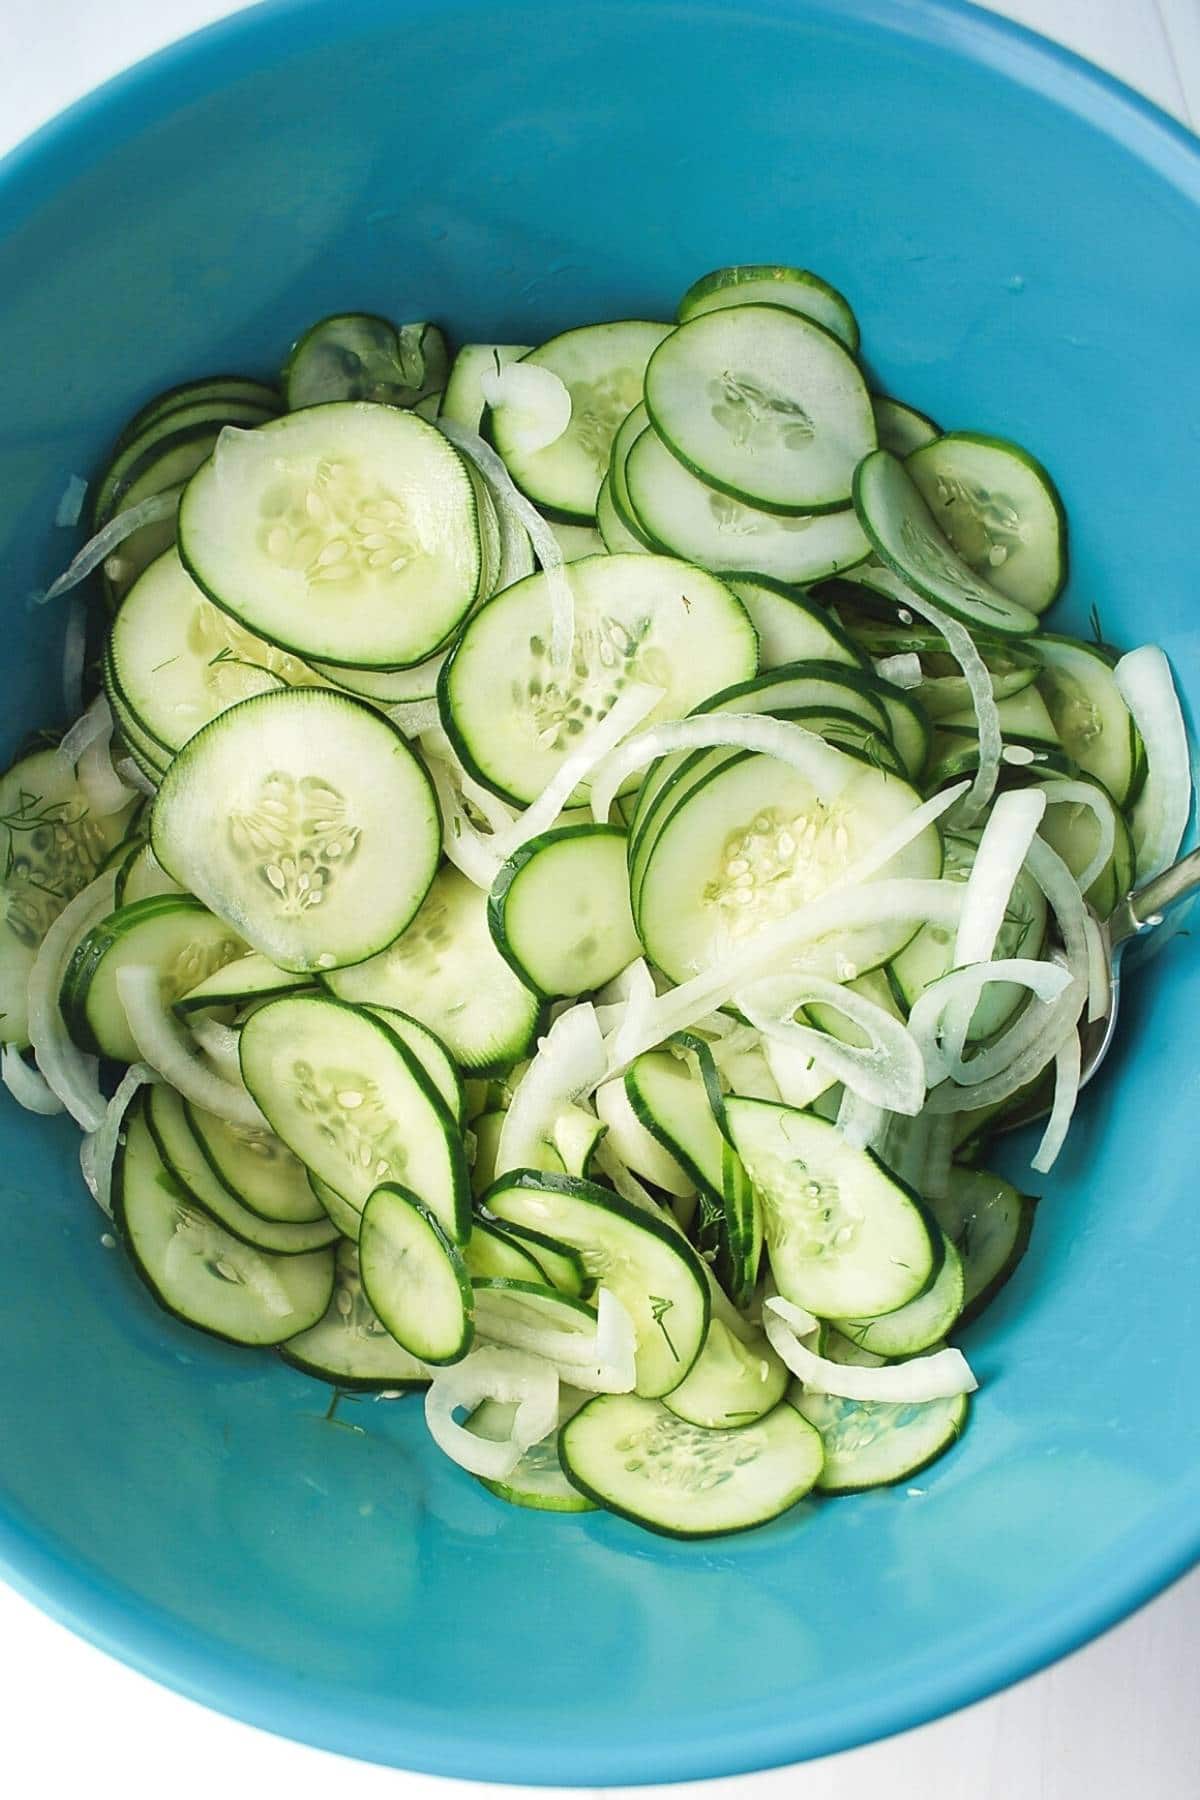 cucumbers and onions in a blue bowl ready to refrigerate